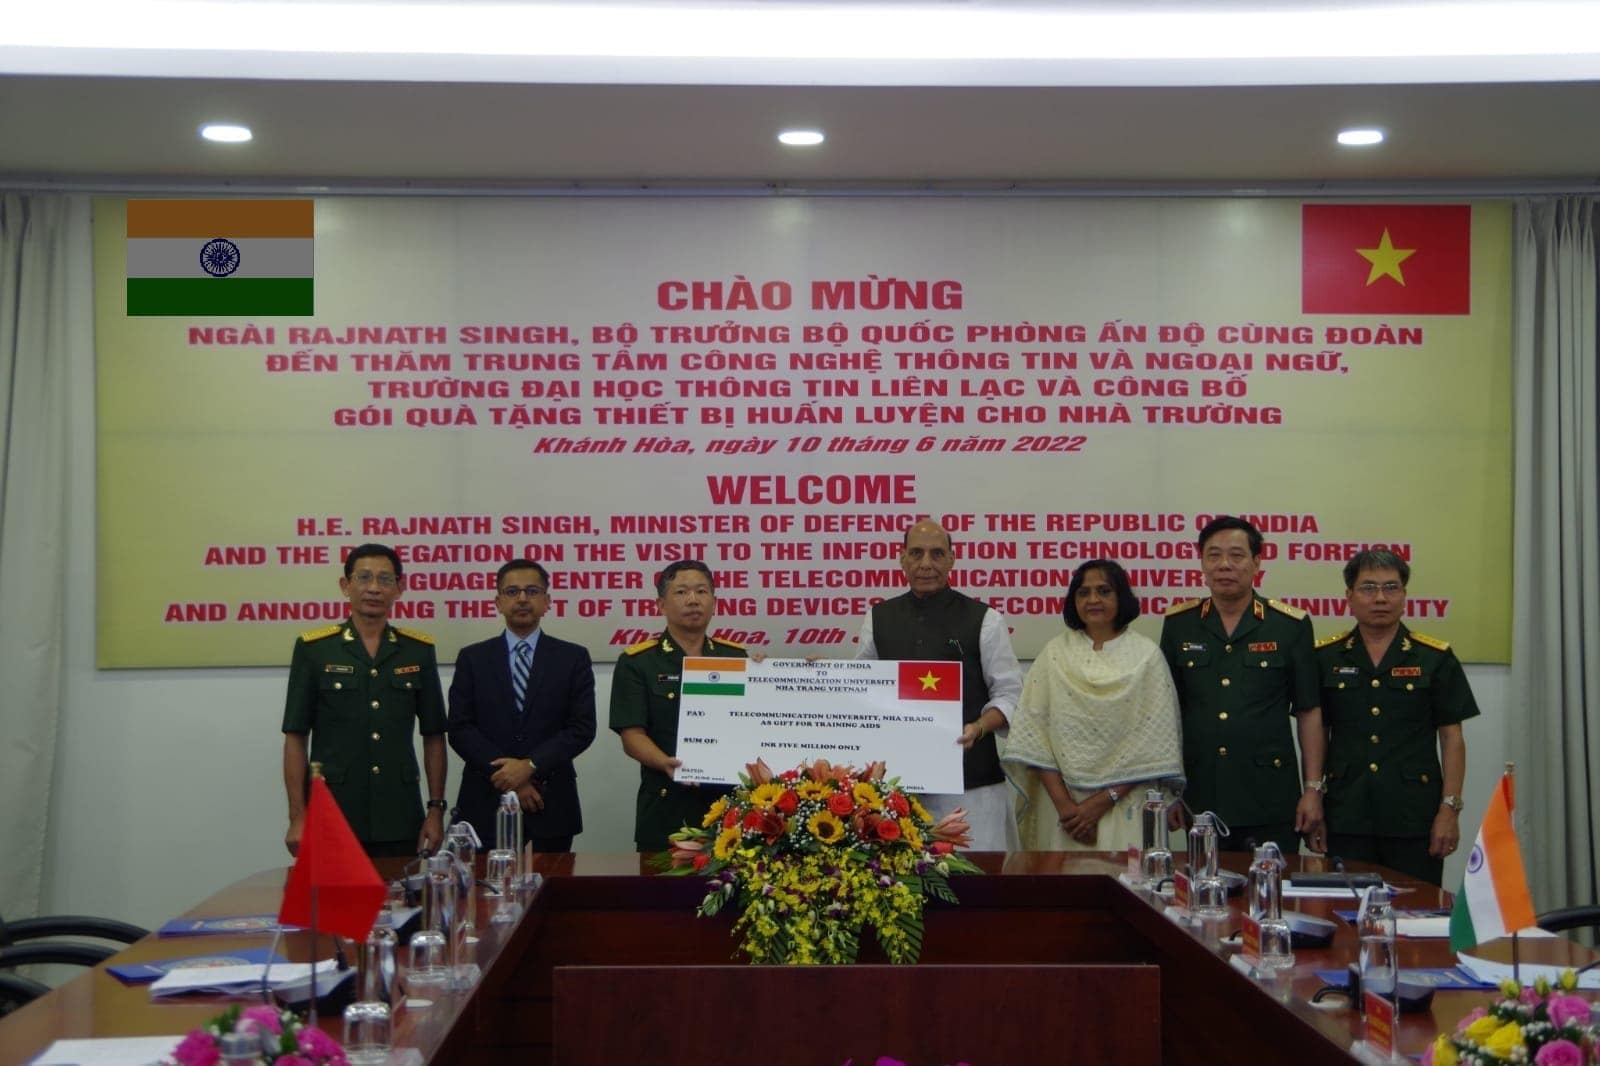 Raksha Mantri visiting the Telecommunications University of Vietnam People's Army where Government of India is extedning a grant of US$ 5 million for setting up an Army Software Park (10 June 2022)